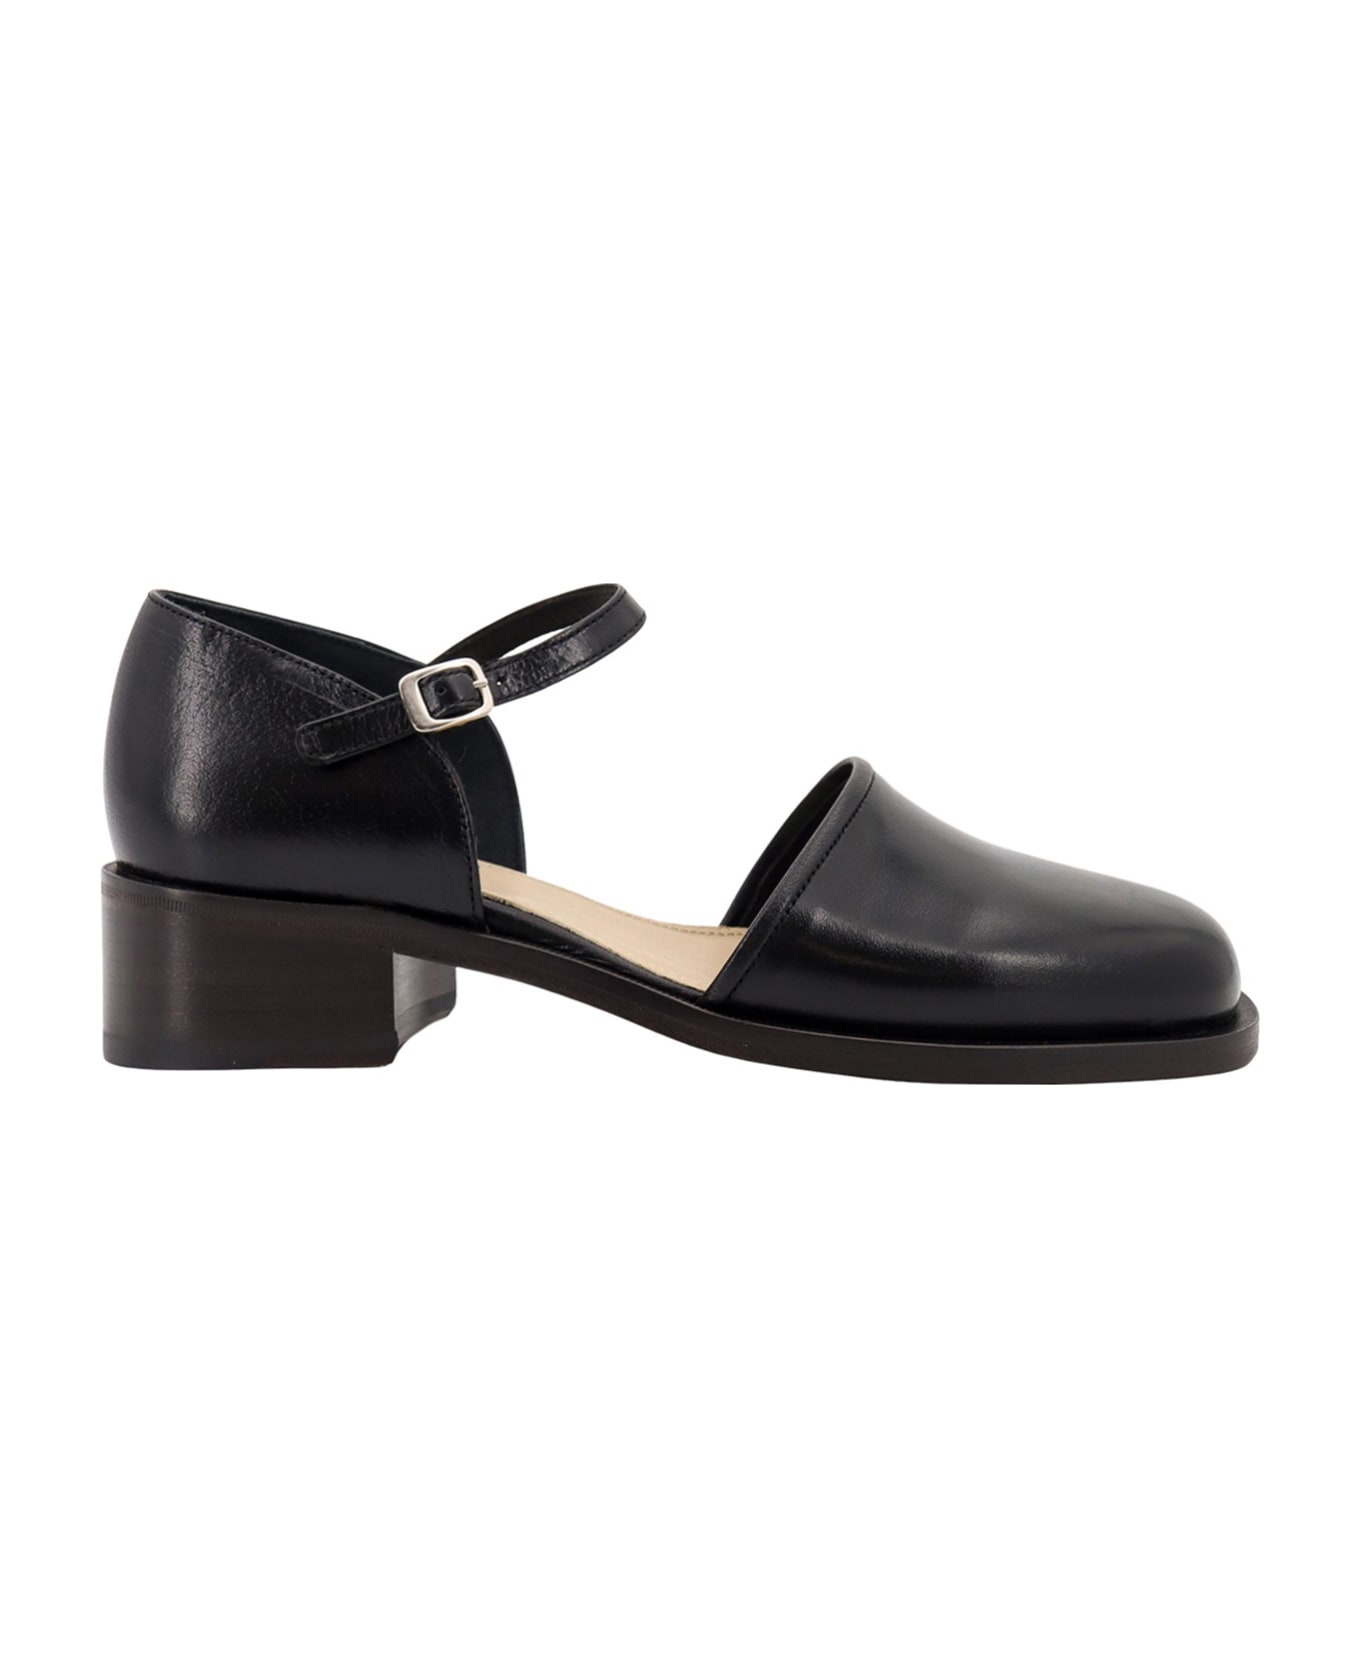 Lemaire Mary Jane Sandals - Black ハイヒール